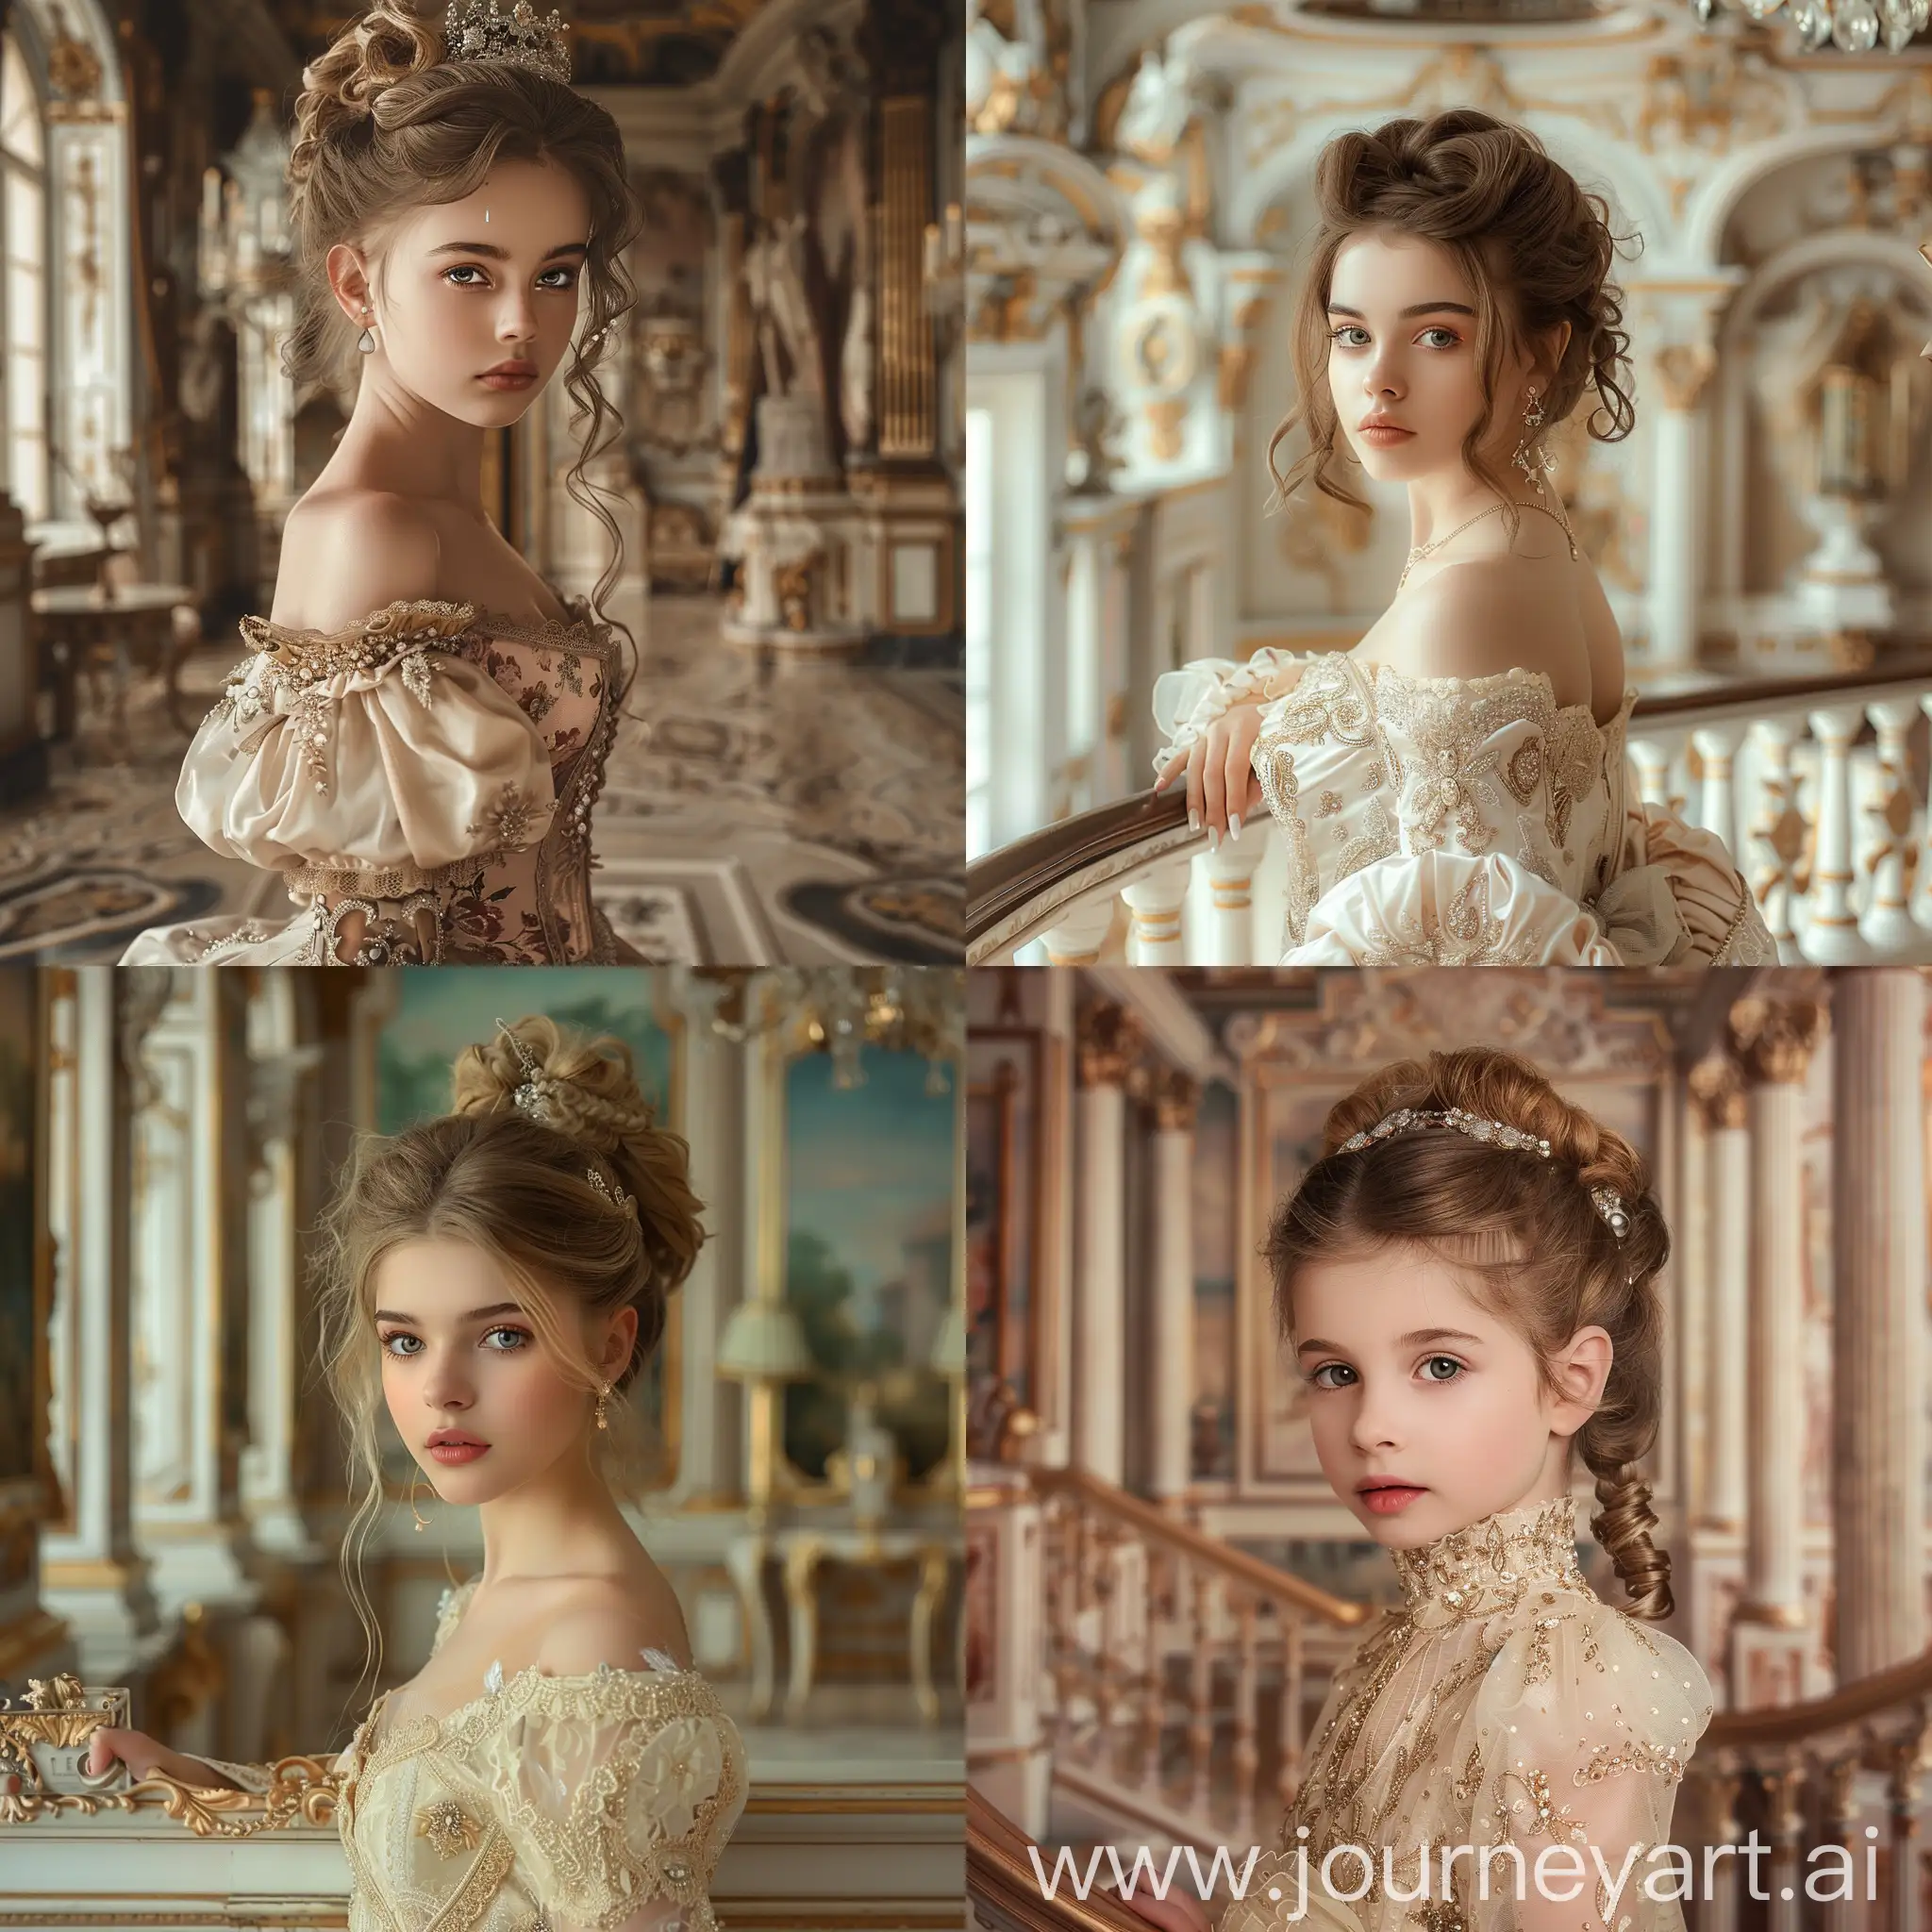 Elegant-Portrait-of-a-Beautiful-Girl-in-a-Royal-Princess-Dress-in-a-Luxurious-Mansion